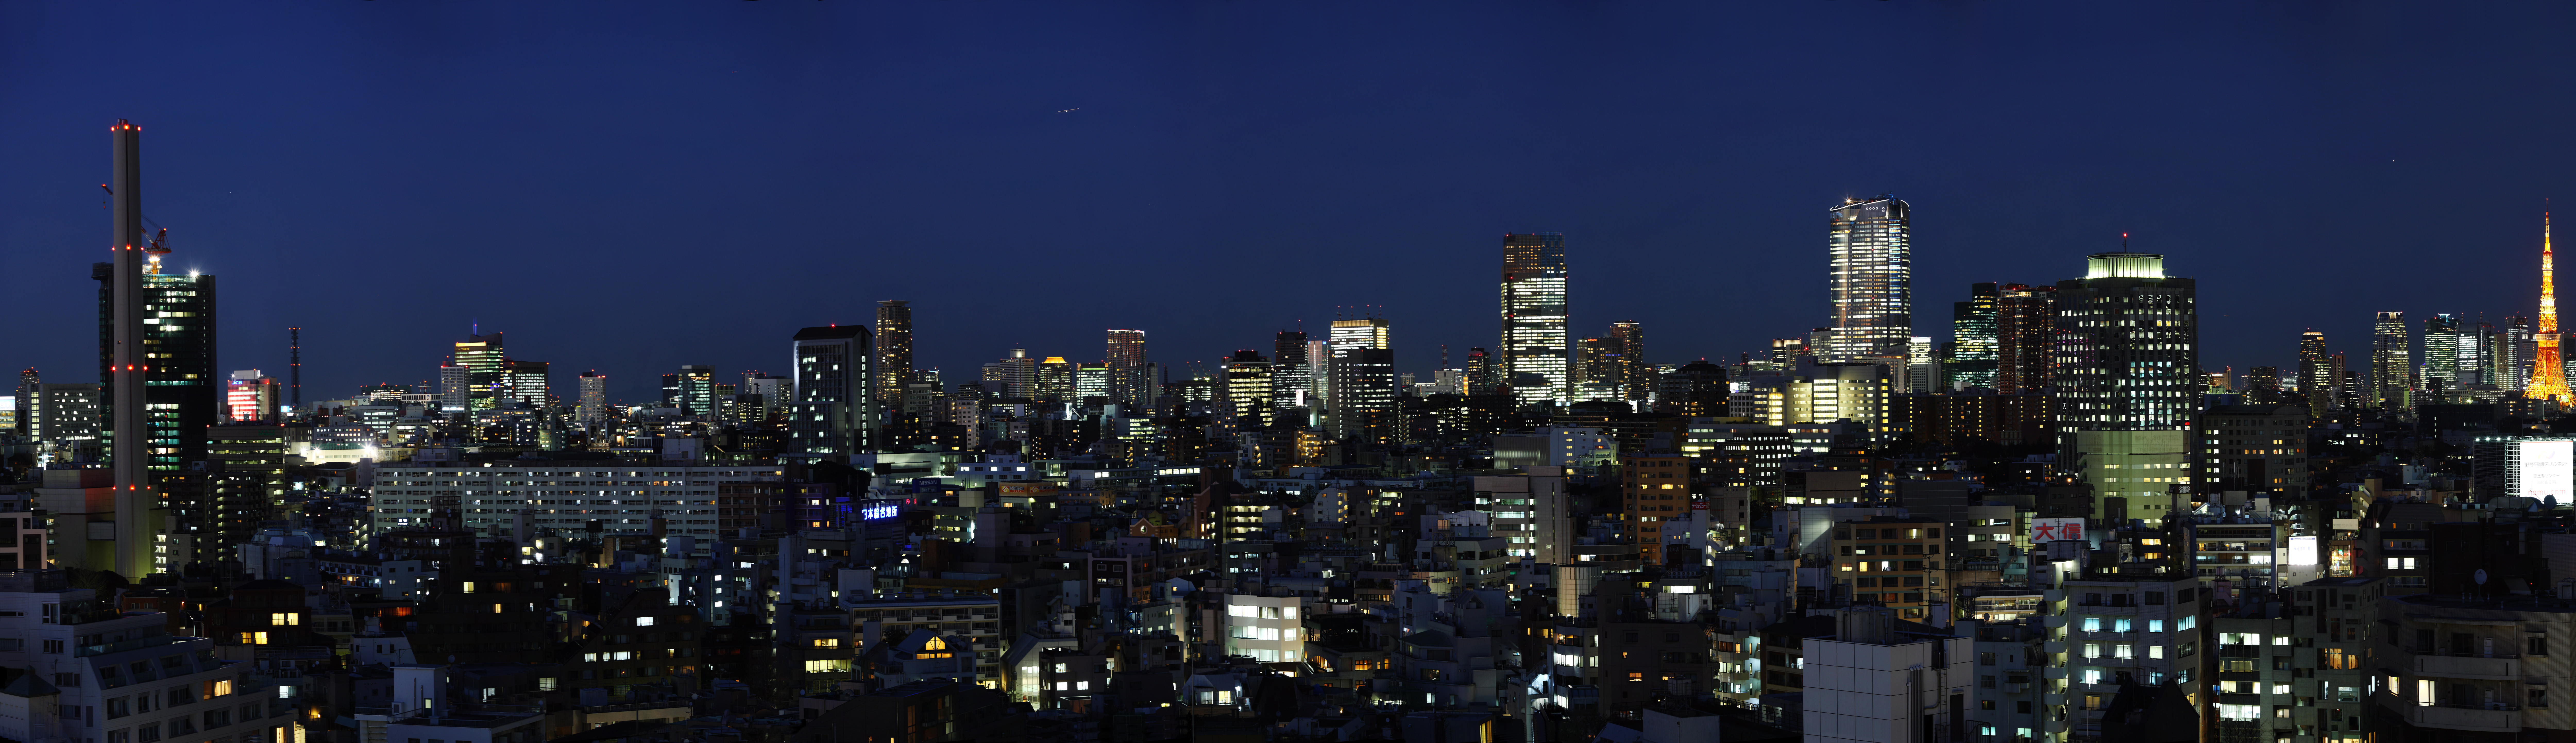 photo,material,free,landscape,picture,stock photo,Creative Commons,A night view of Tokyo, night view, building, Illumination, big city